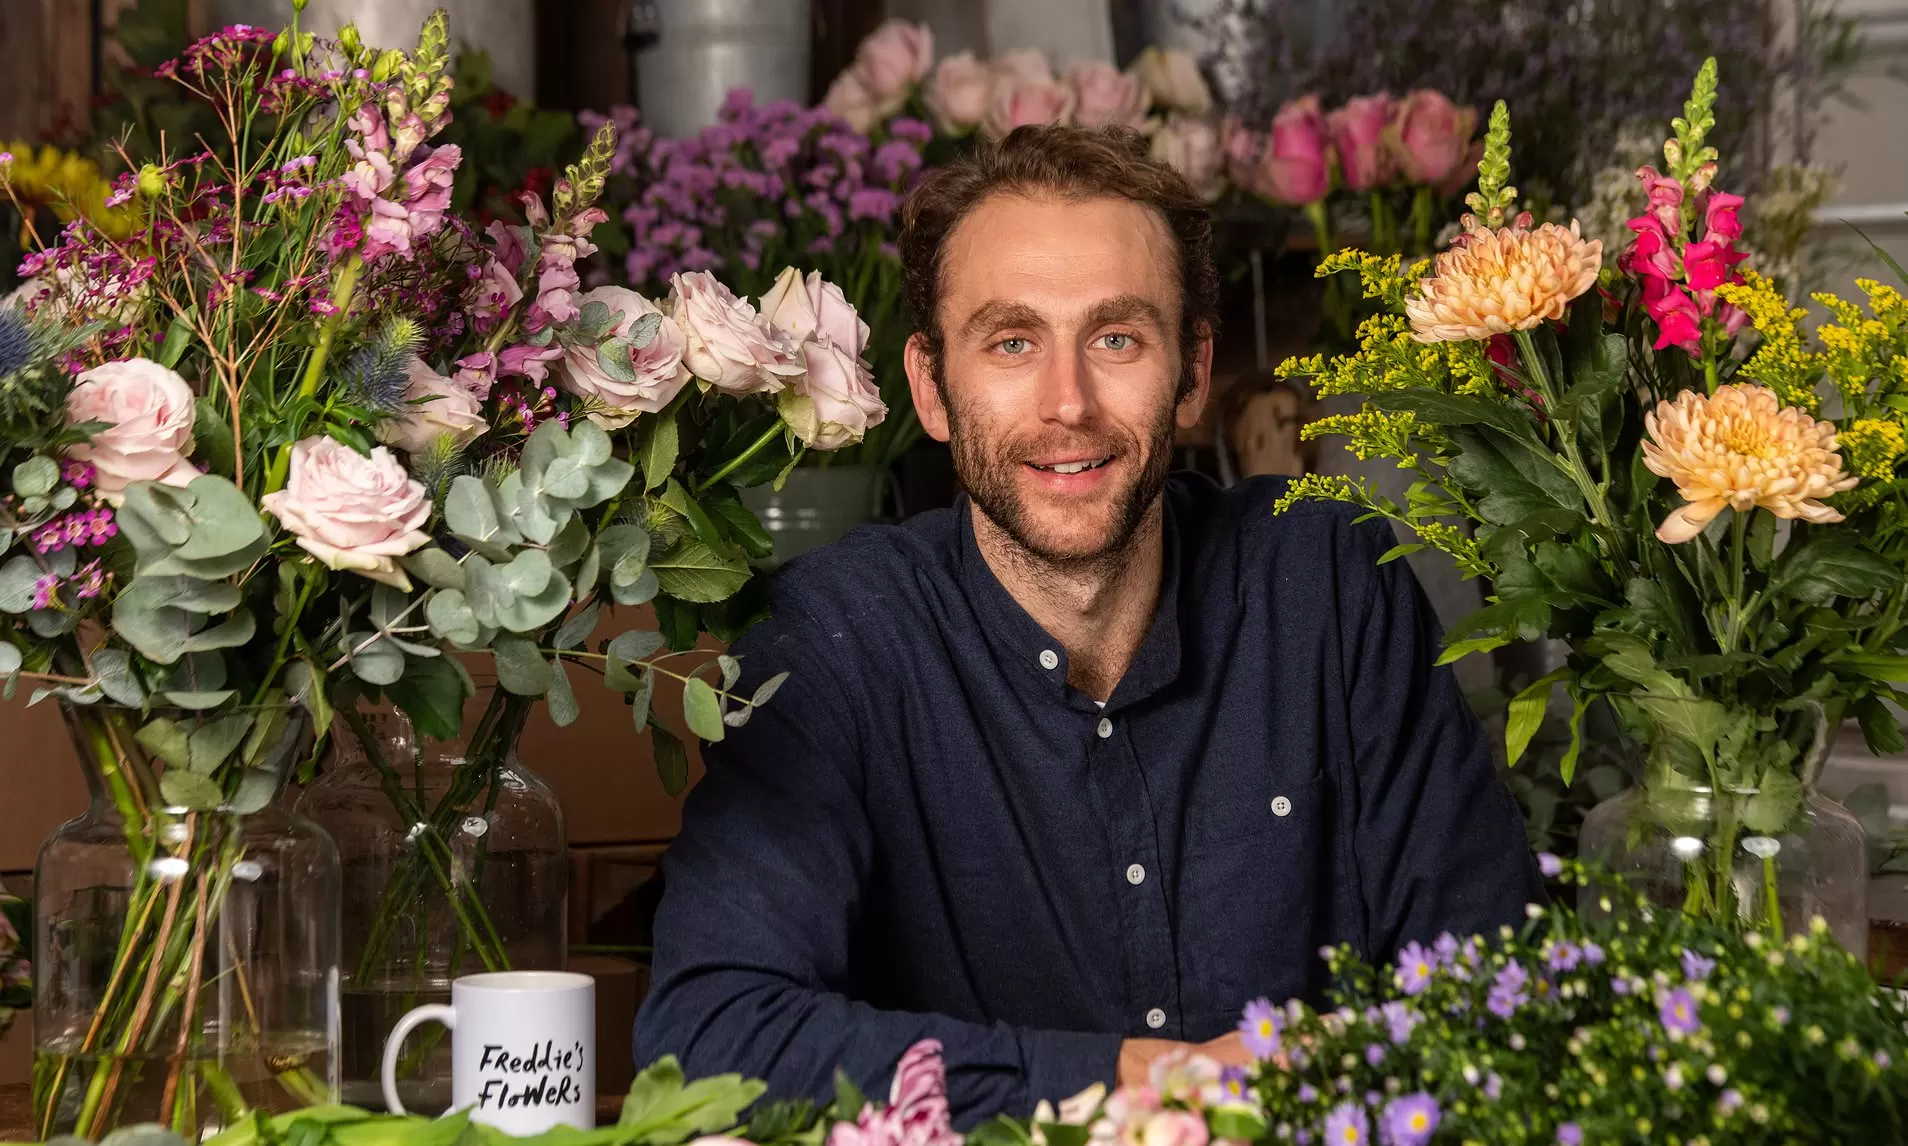 Freddie Garland, founder of Freddie's Flowers, sat surrounded by flowers smiling at the camera.